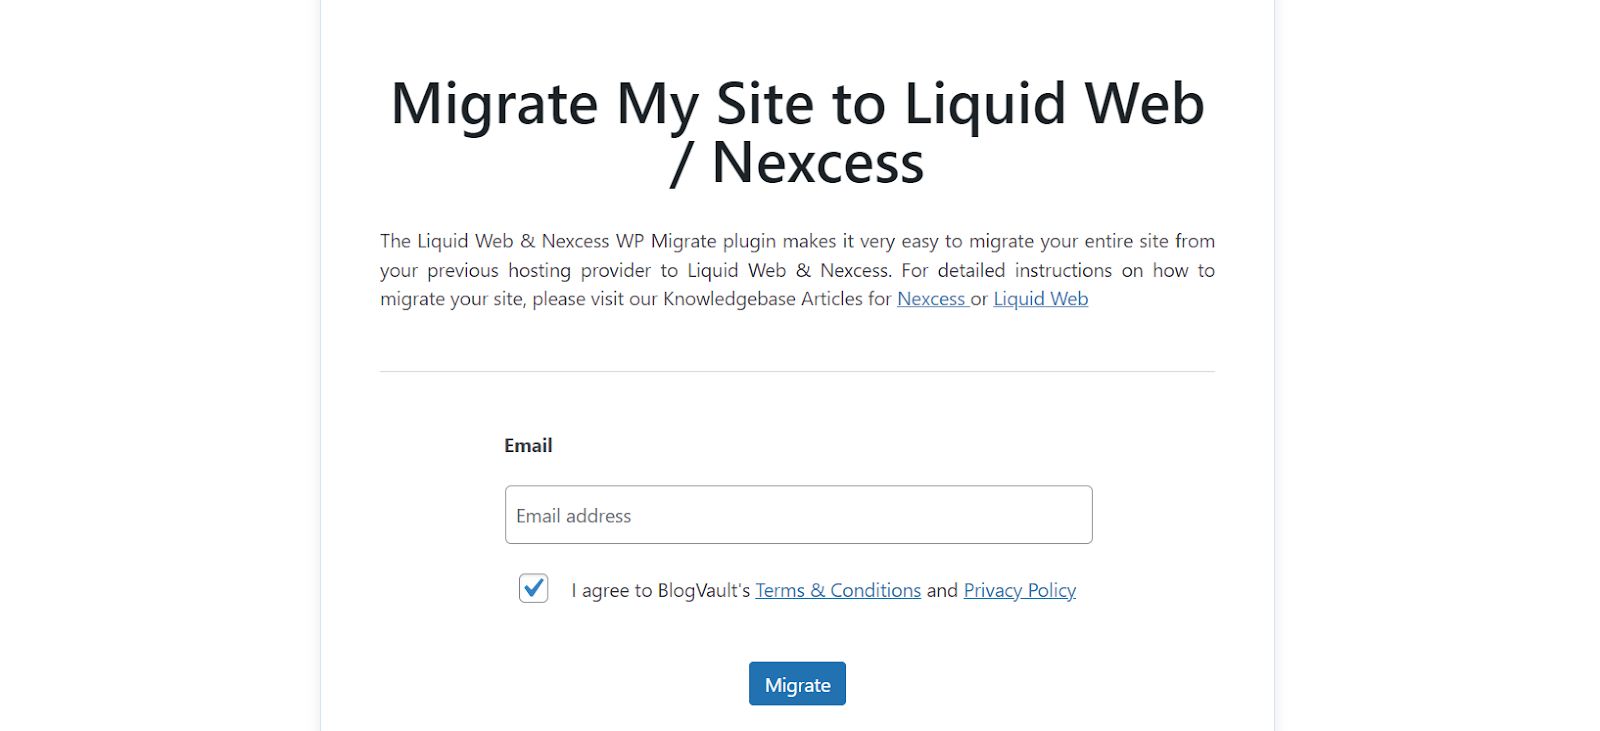 At this point, you’ll be prompted to enter your email address. After doing this, click Migrate.